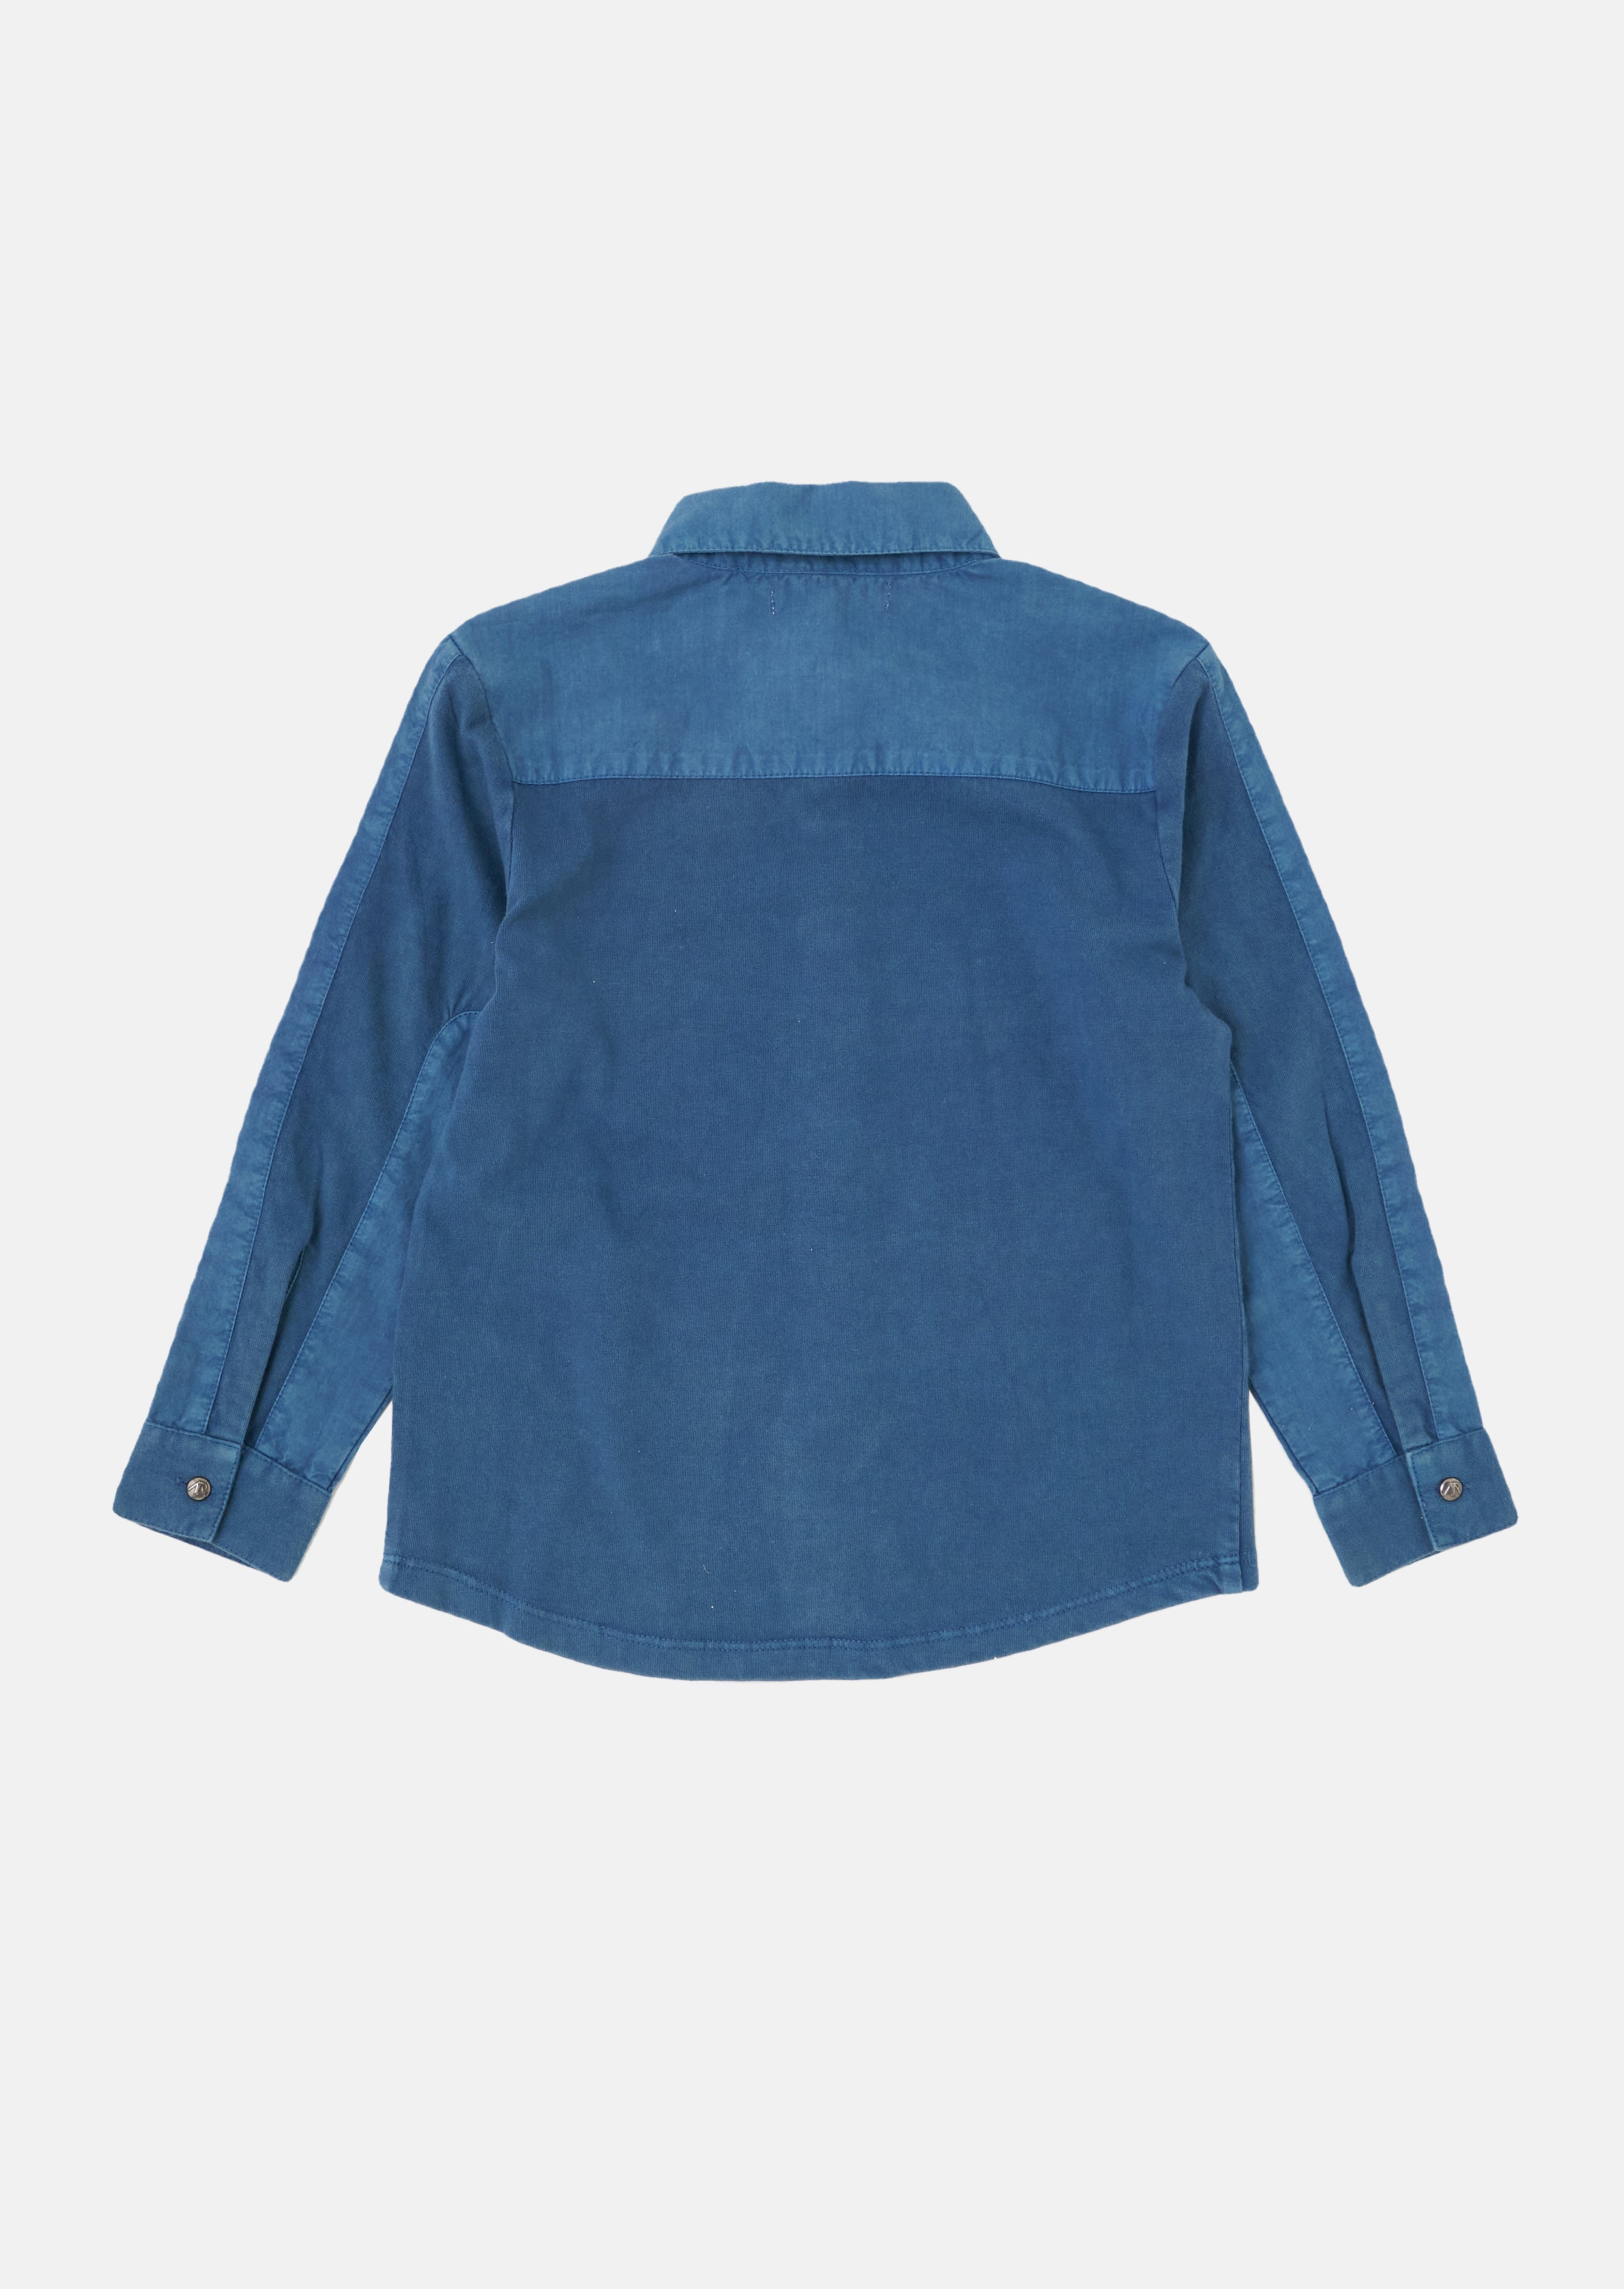 Boys Solid Blue Full Sleeves Cotton Shirt